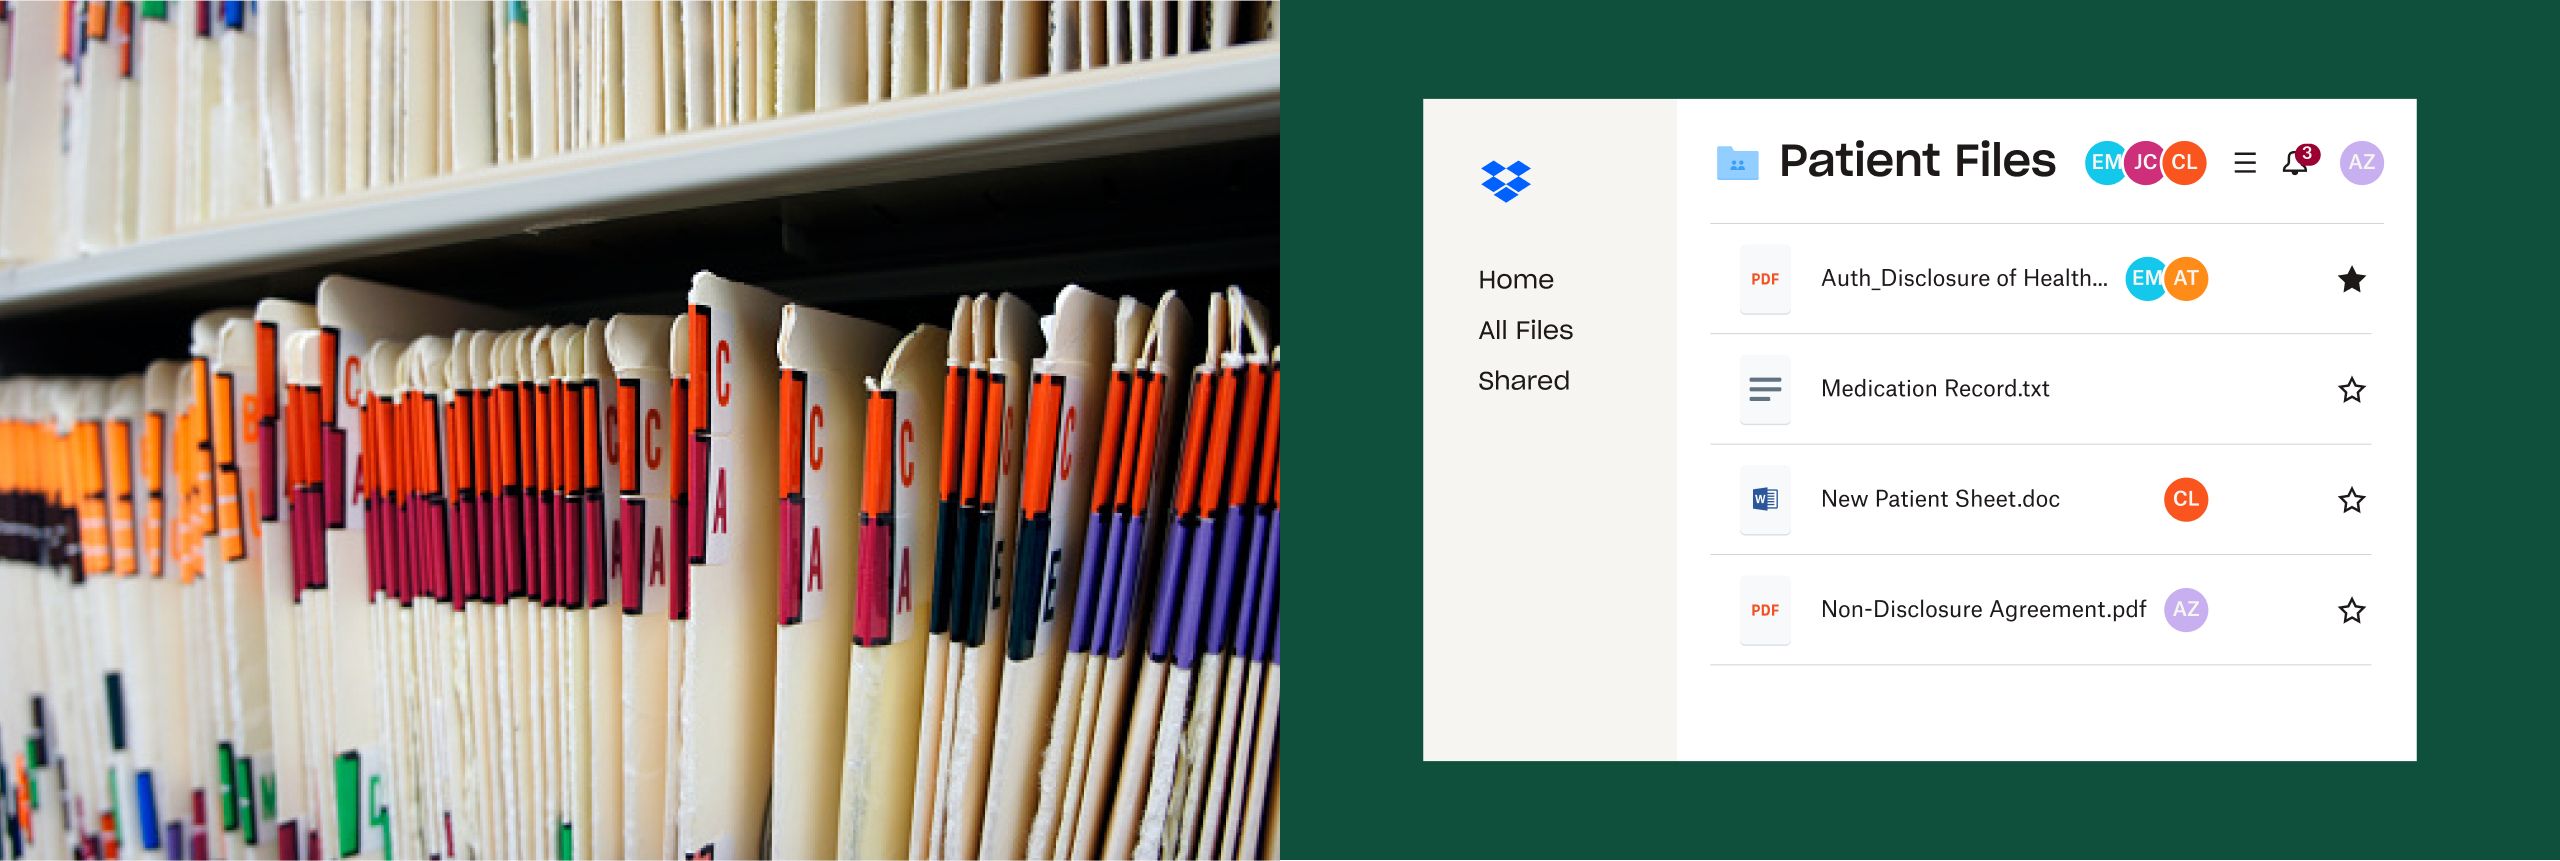 Split-pane image. Close-up photo of a shelf of alphabetized medical records on the left, product shot on the right.